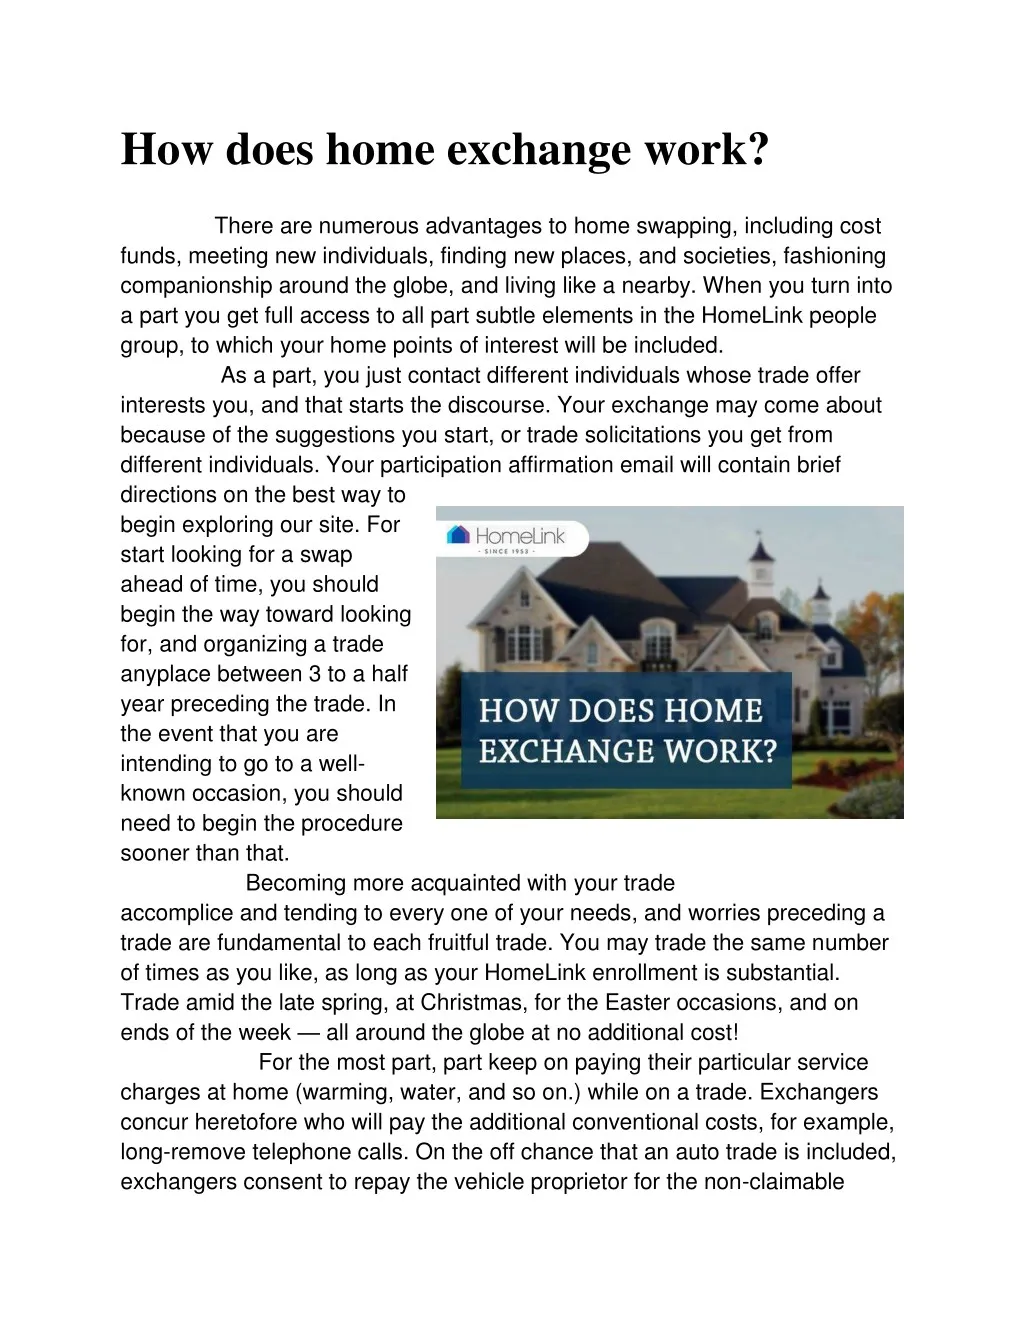 how does home exchange work